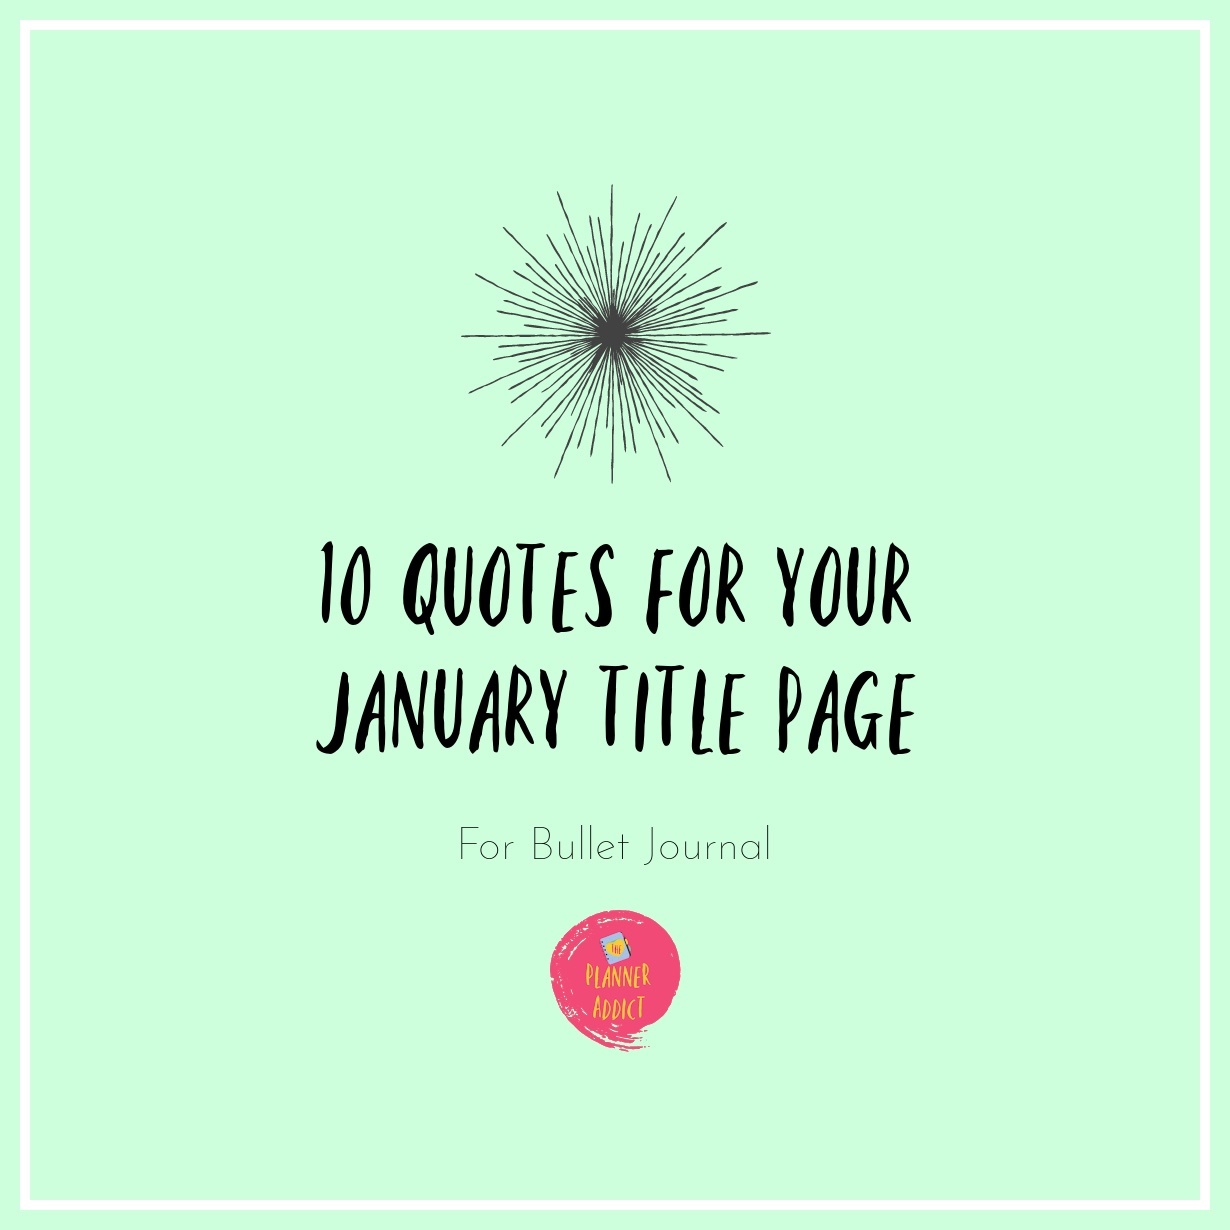 Top 10 January Quotes for Your January Title Page - Bullet Journal